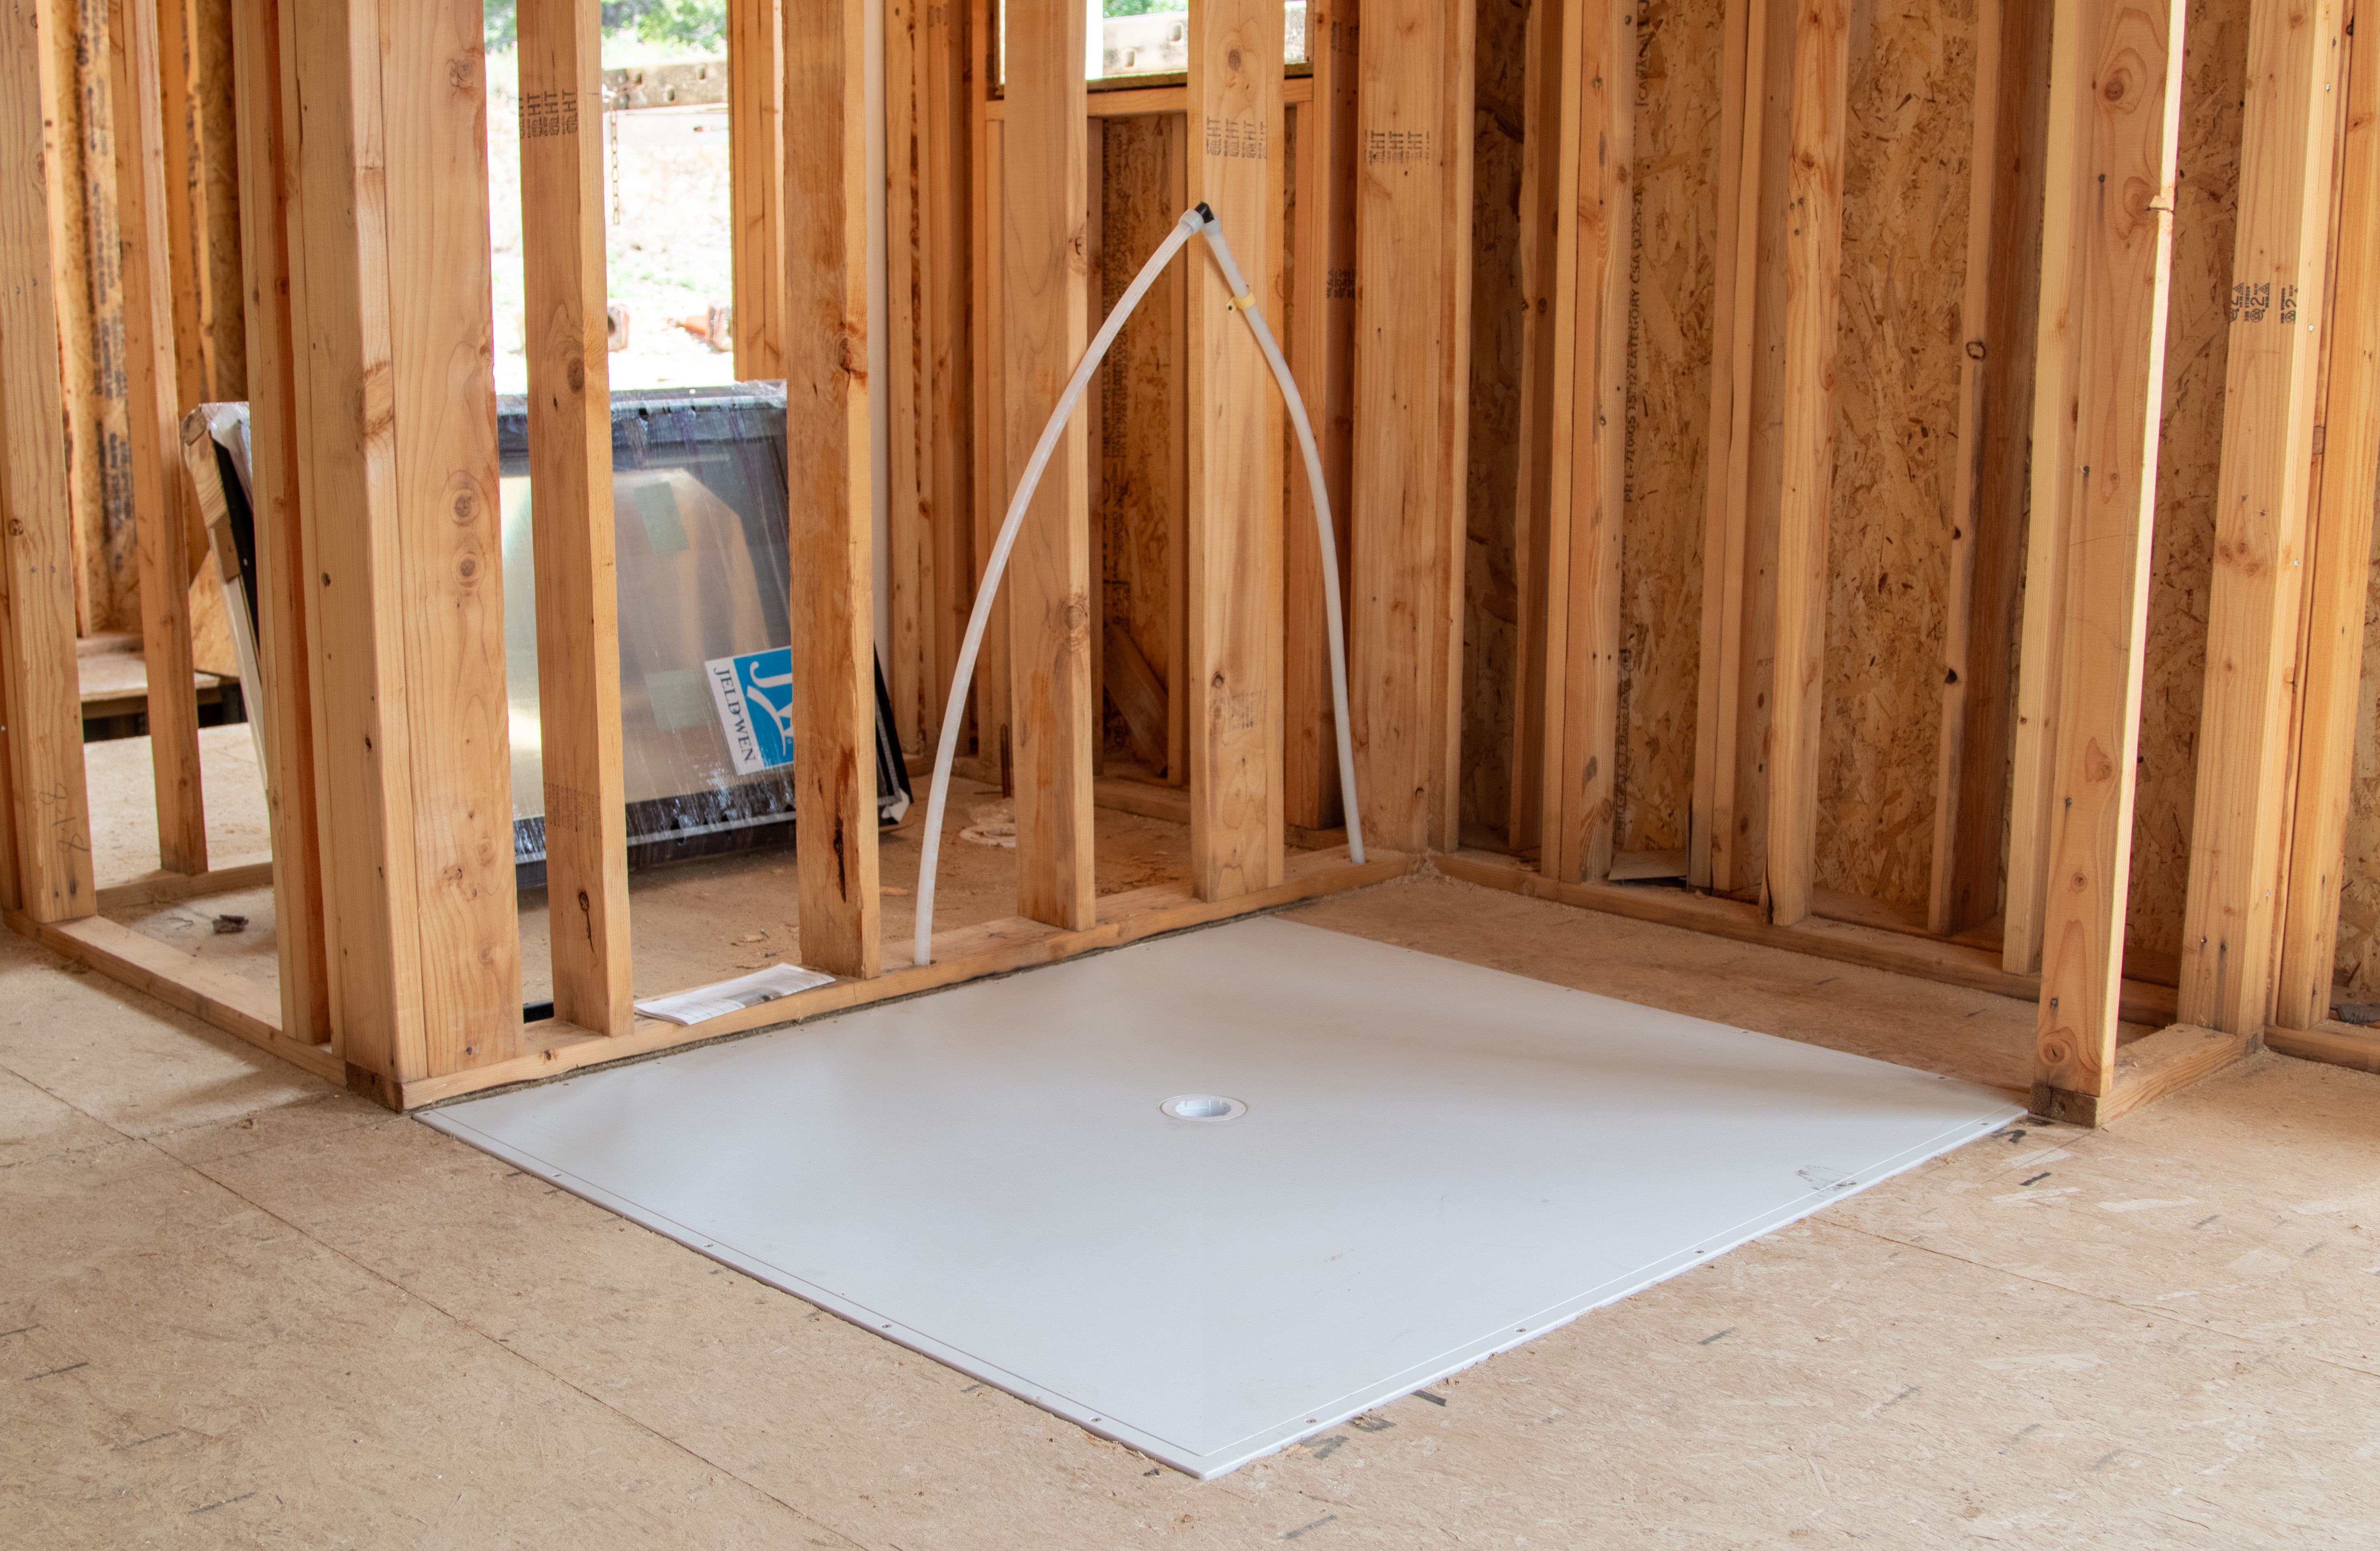 Ease of installation meets durability and protection with KurbX curbless structural shower pans. Photo courtesy of Thrive Builders.